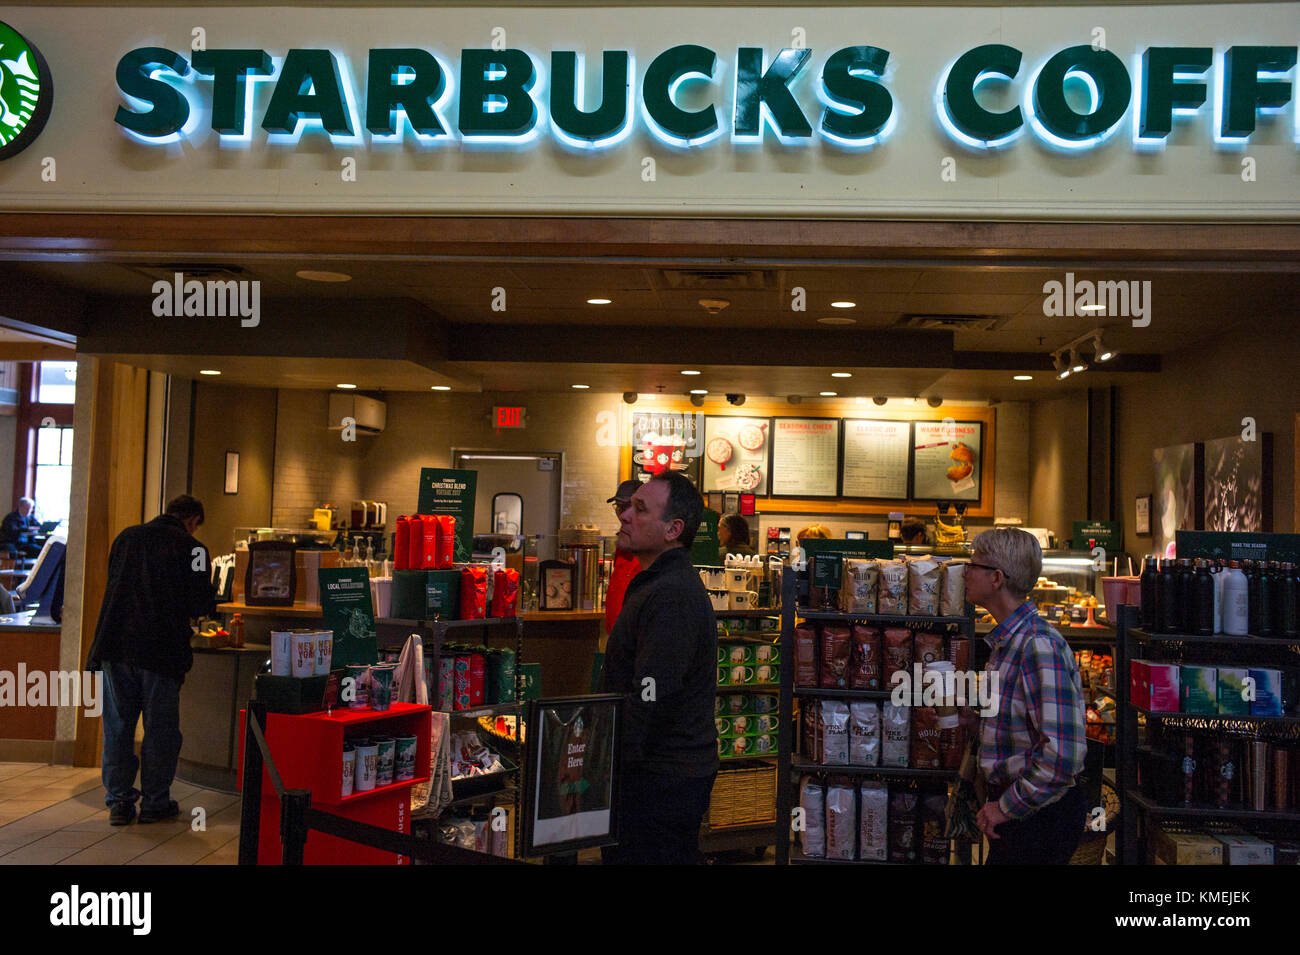 Customers stand in line at a Starbucks Coffee Shop inside the New Baltimore travel stop along the New York State Thruway  in Coxsackie, New York. Stock Photo